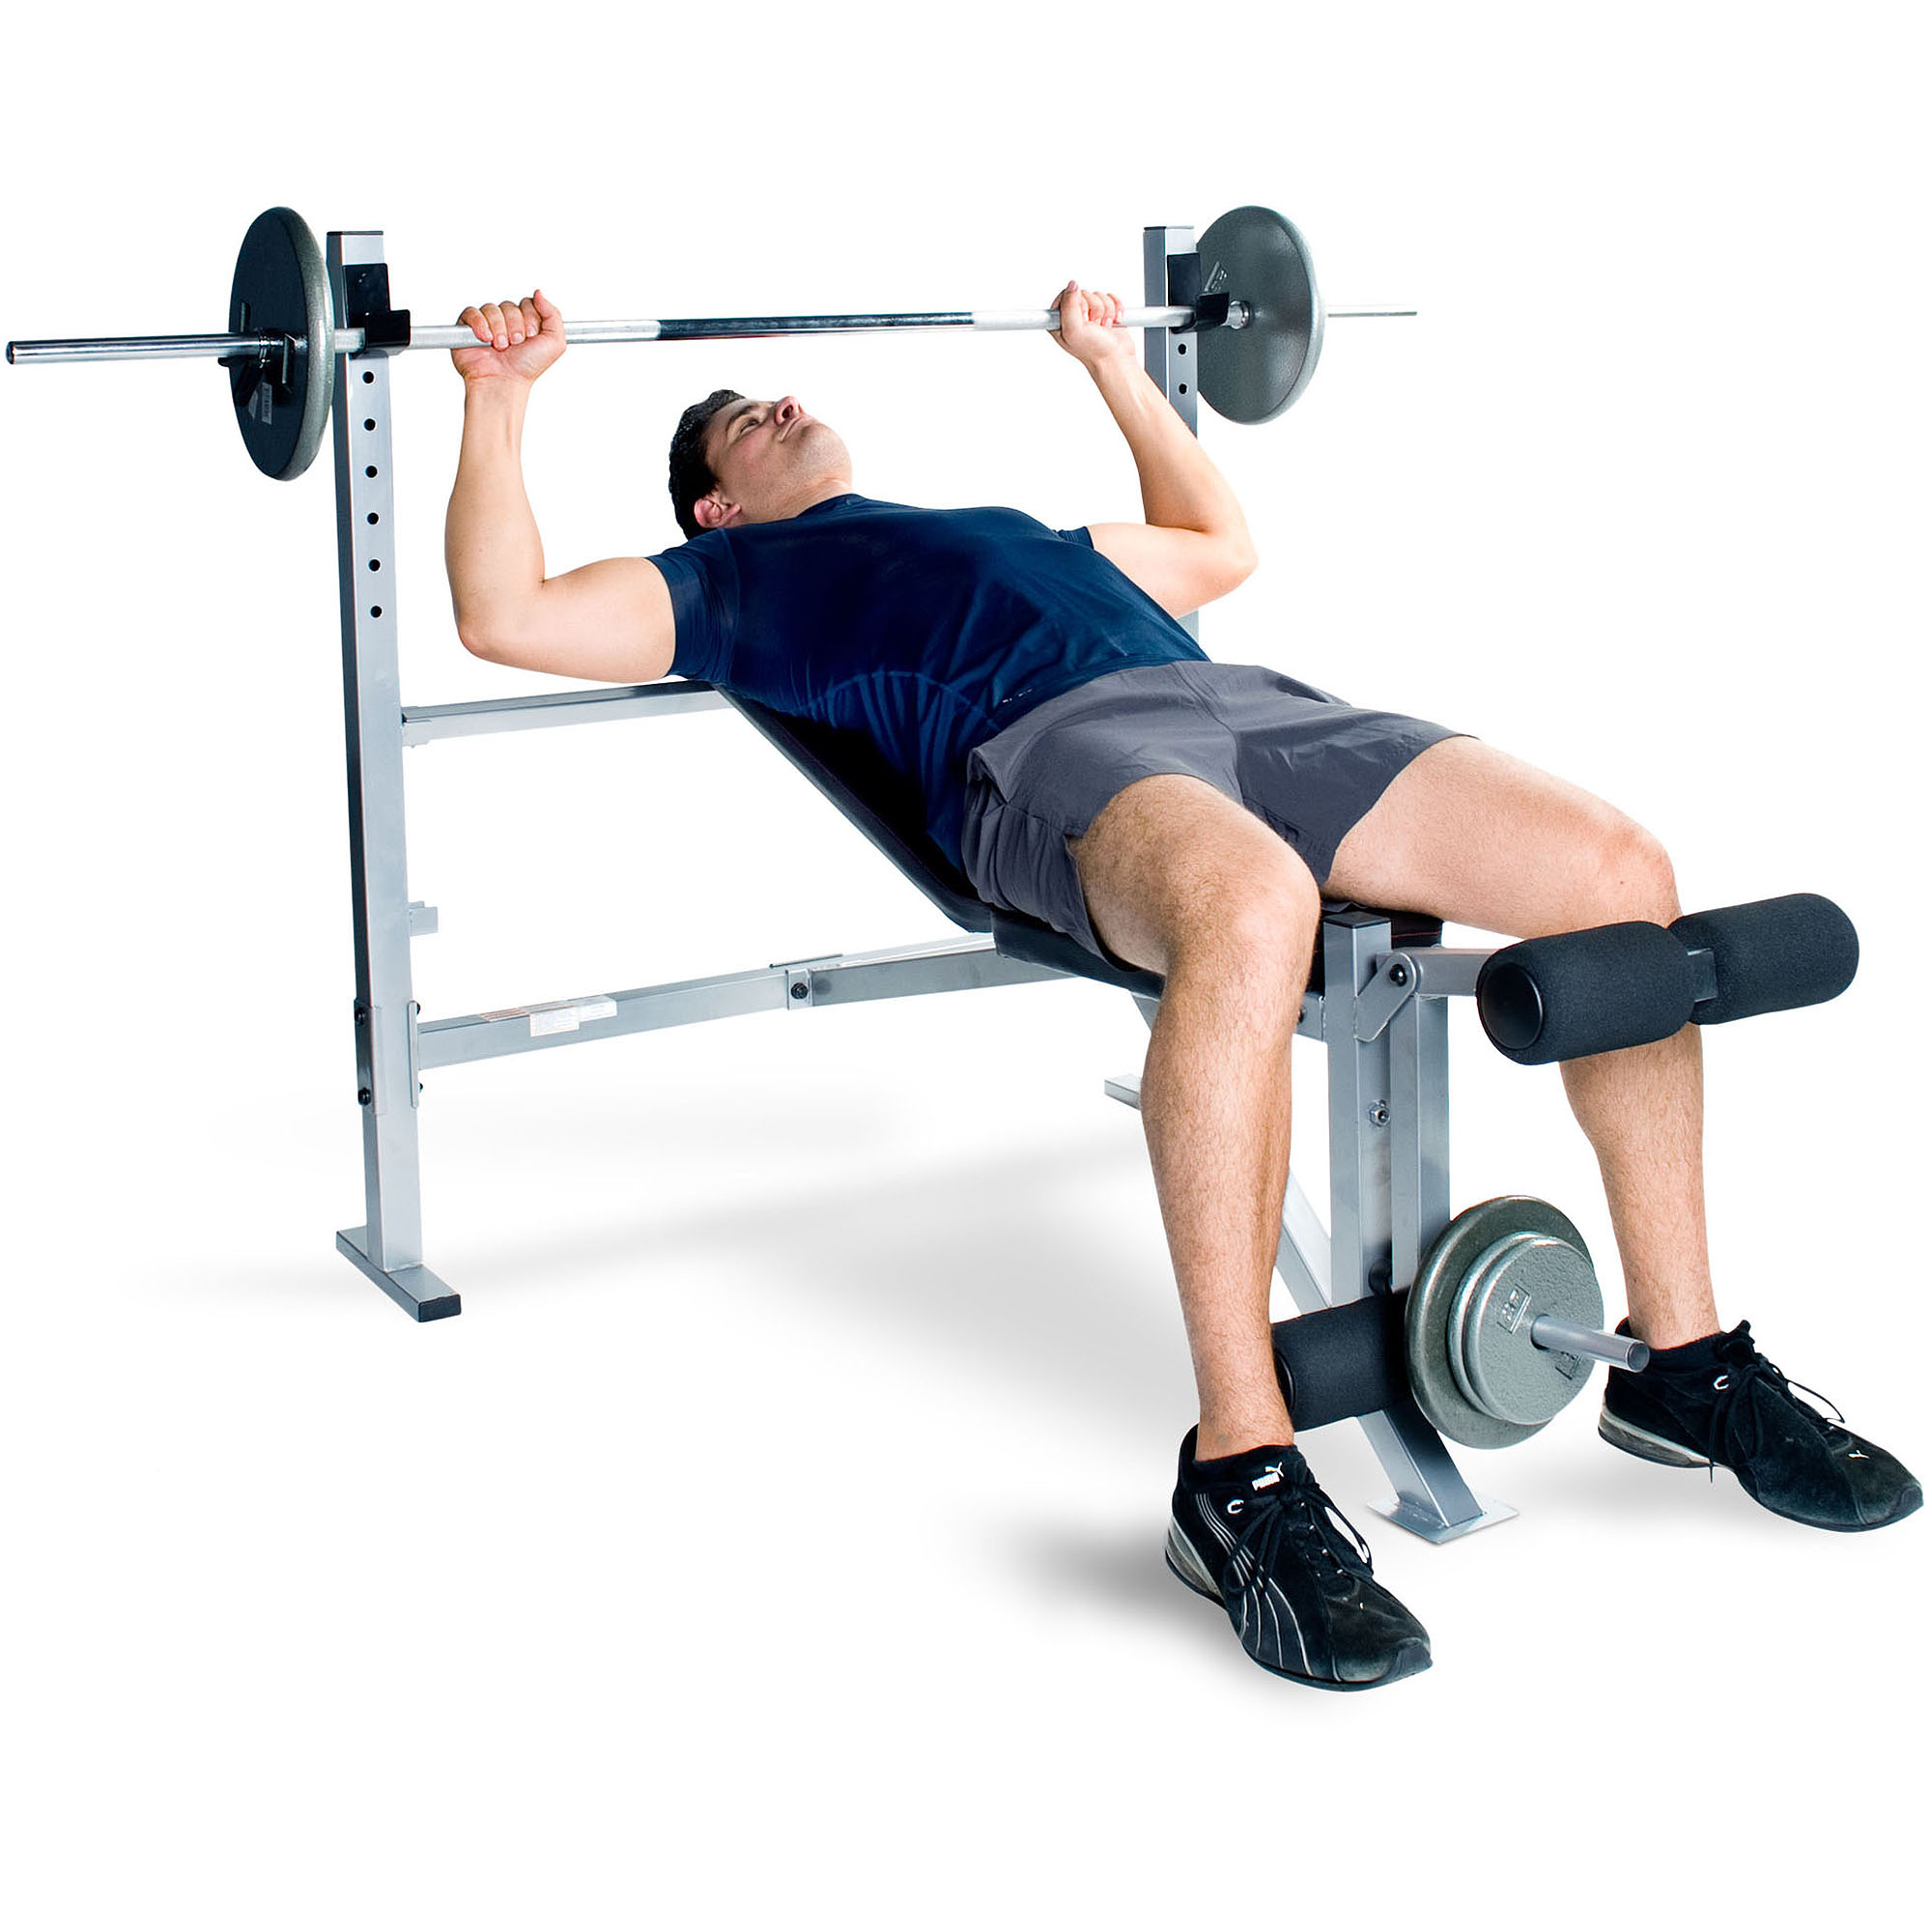 CAP Strength Deluxe Mid-Width Weight Bench with Leg Attachment (500lb Capacity), Black and Gray - image 3 of 5